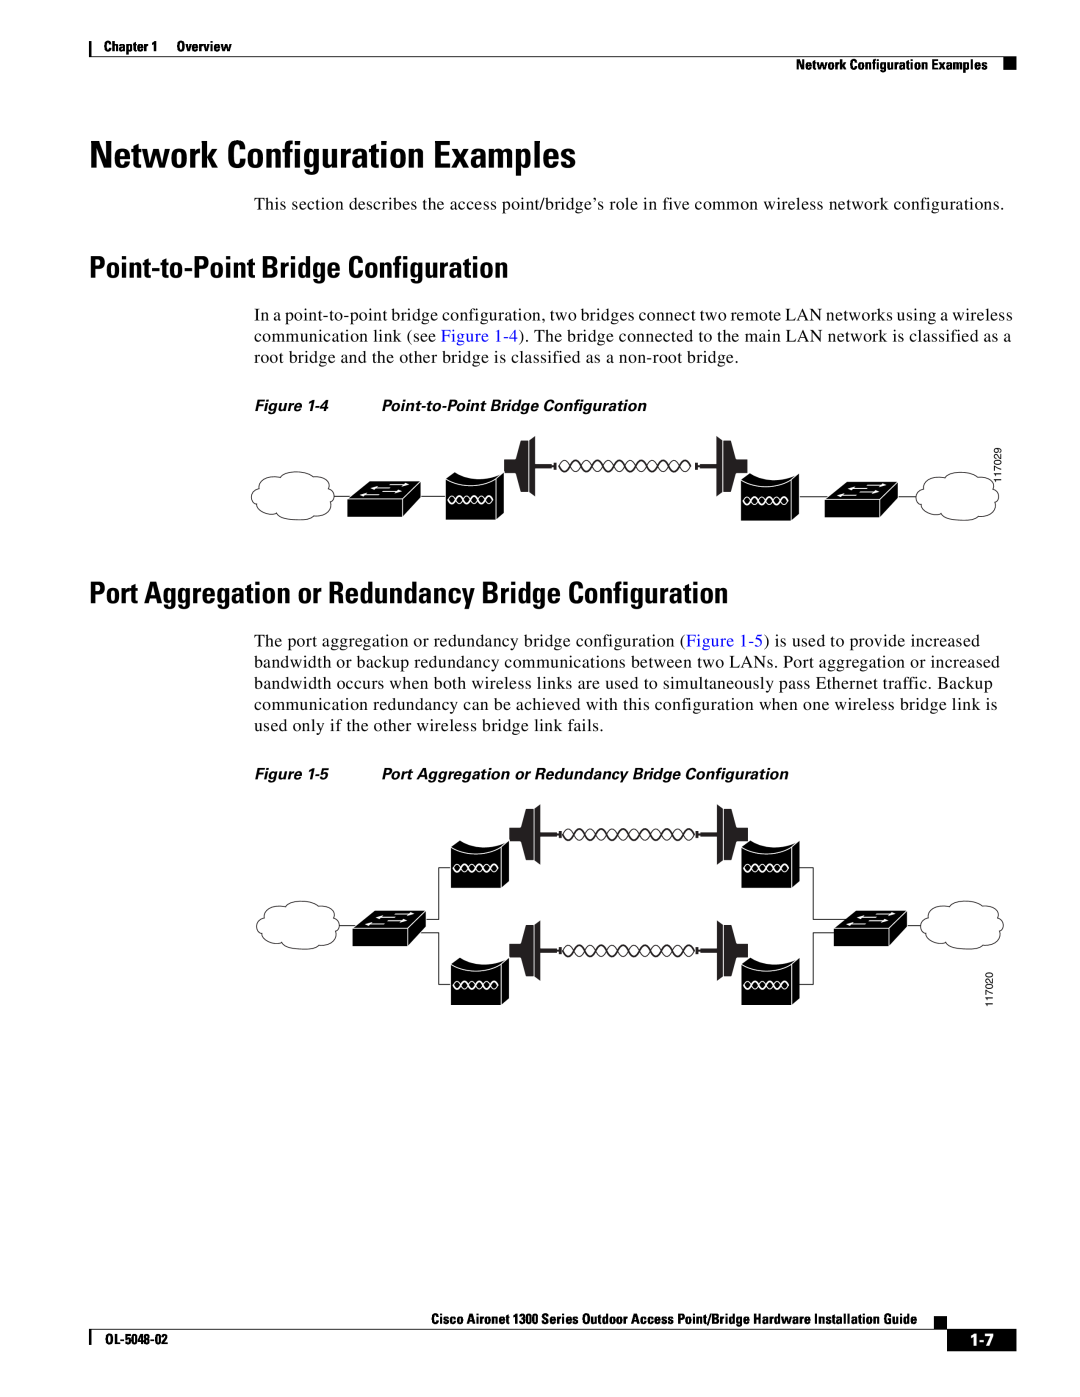 Cisco Systems 1300 Series manual Network Configuration Examples, Point-to-Point Bridge Configuration 